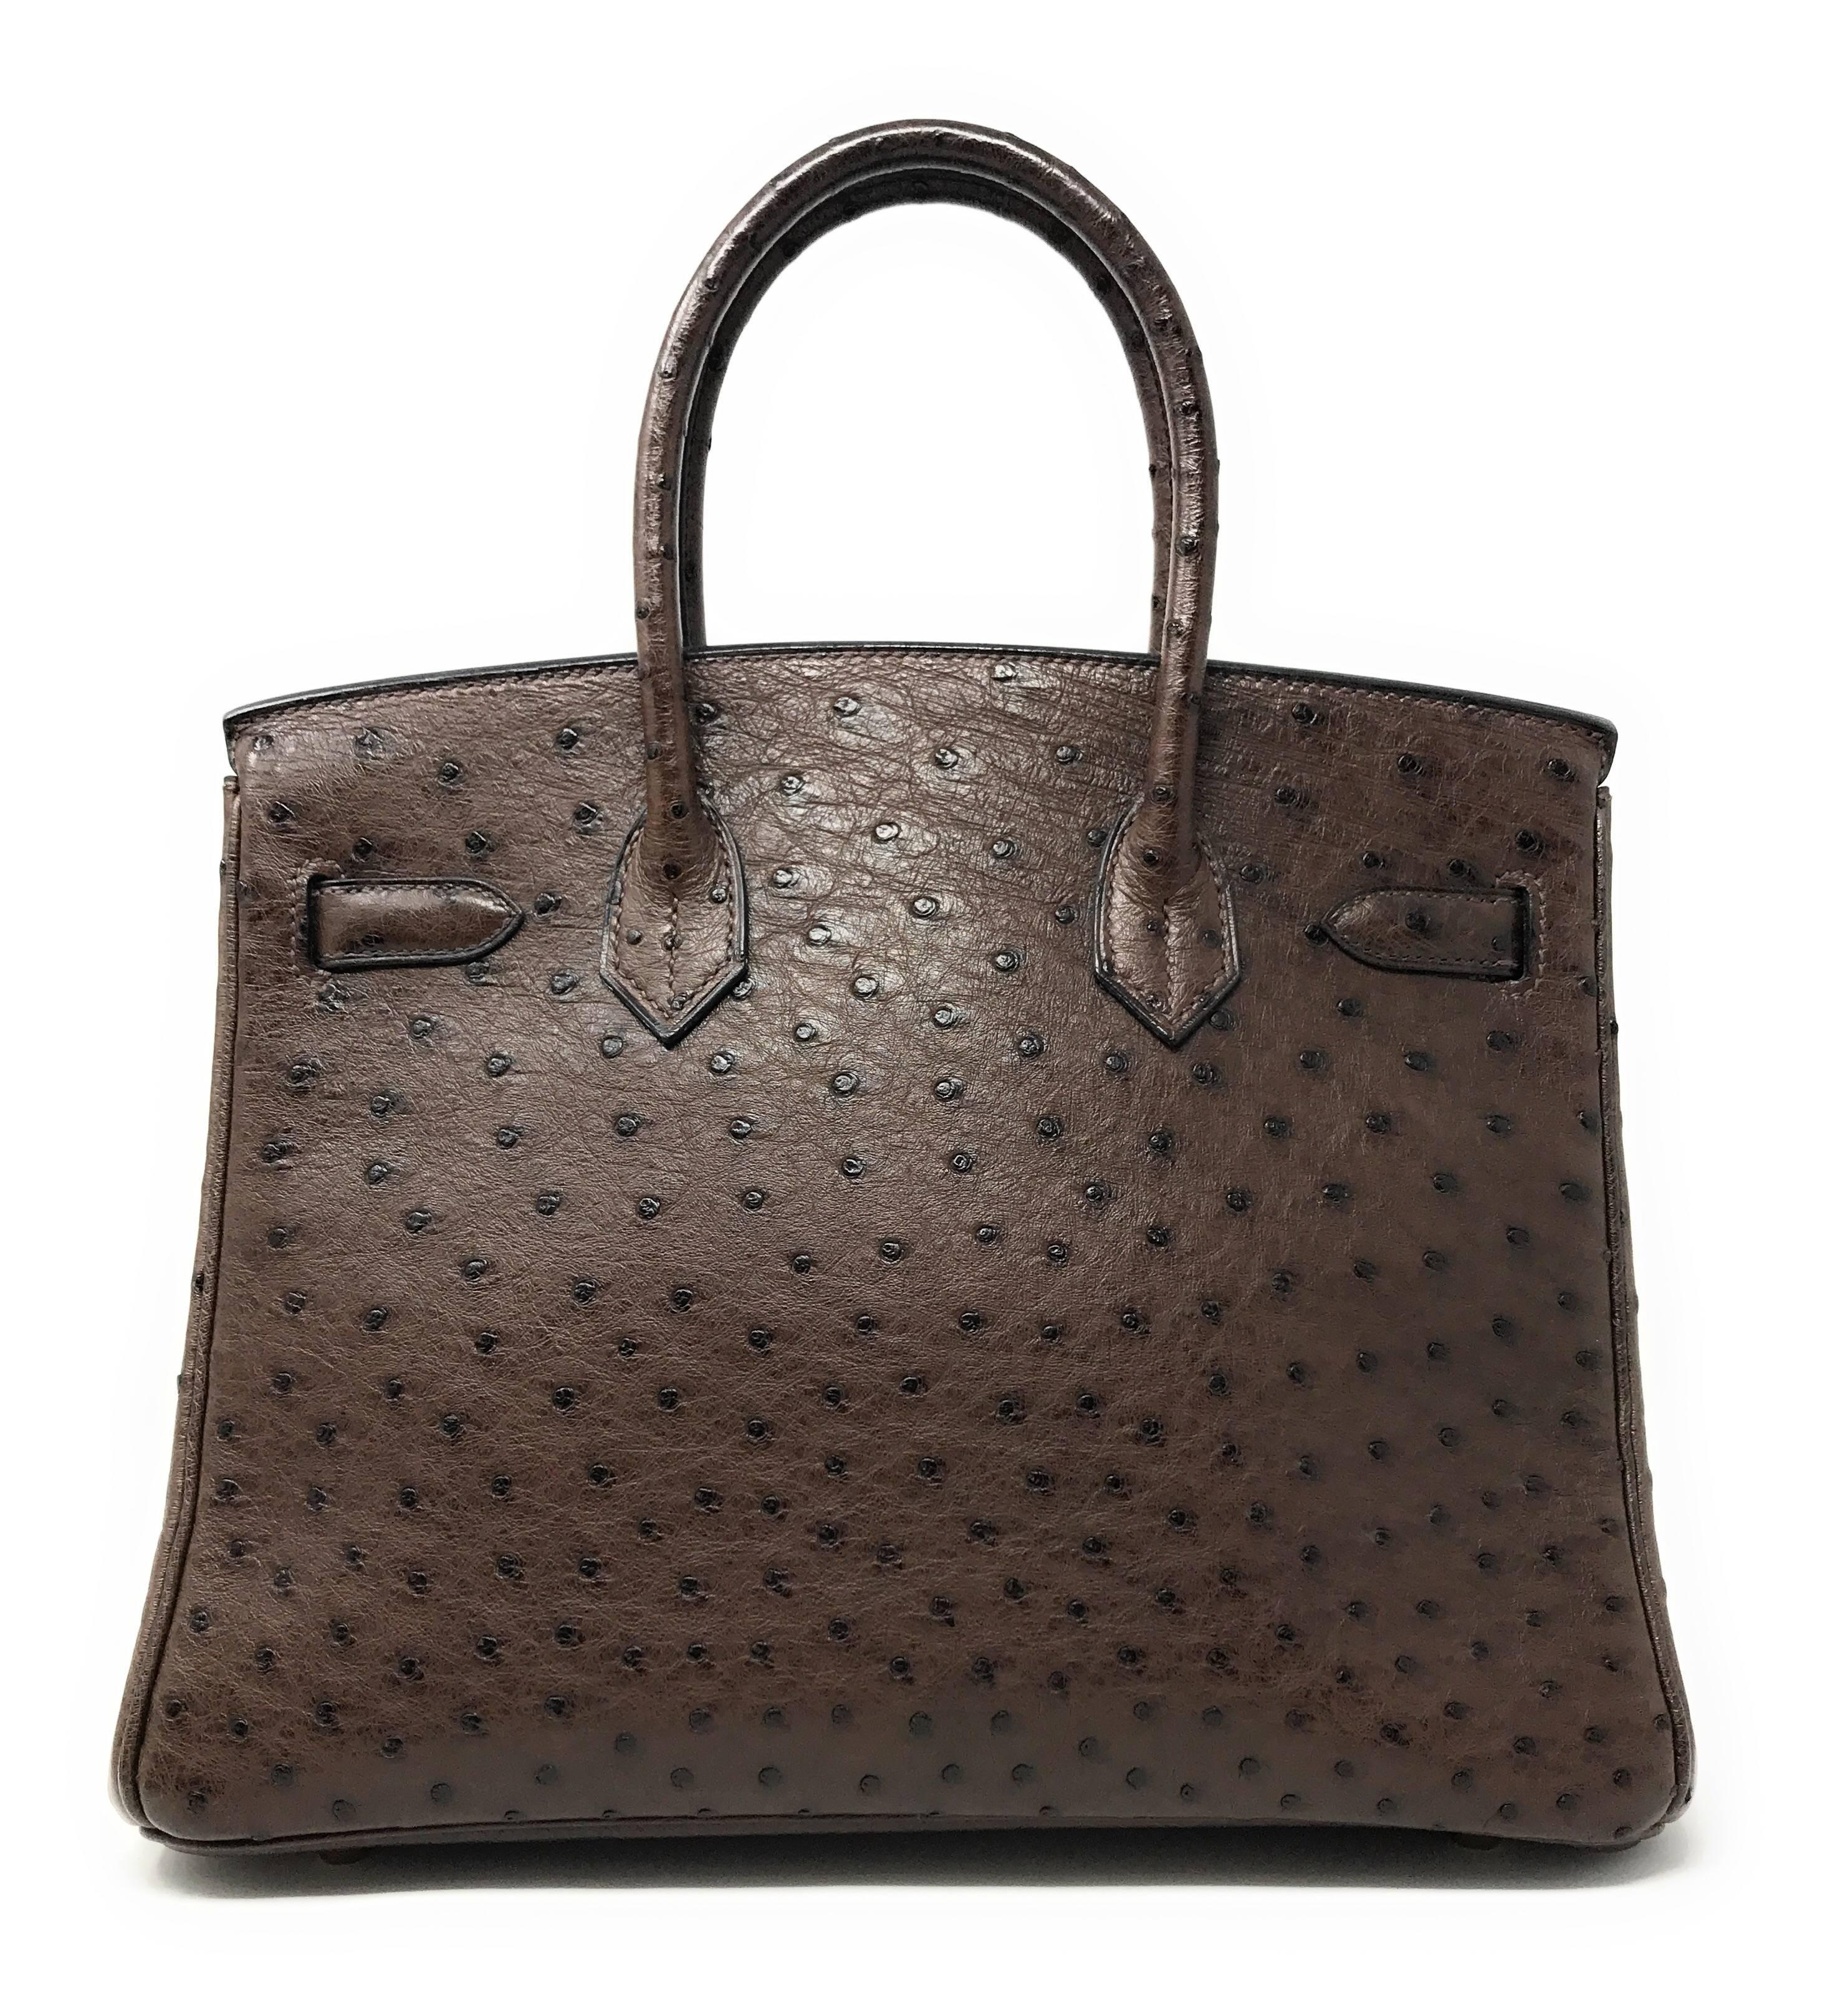 Better than chocolate! This 30cm dark Chocolate Brown Birkin is crafted in Ostrich skin which was discontinued by Hermes for a while making it an extremely hard to to get luxury item. 
Pores are visible throughout the exterior creating a chic and